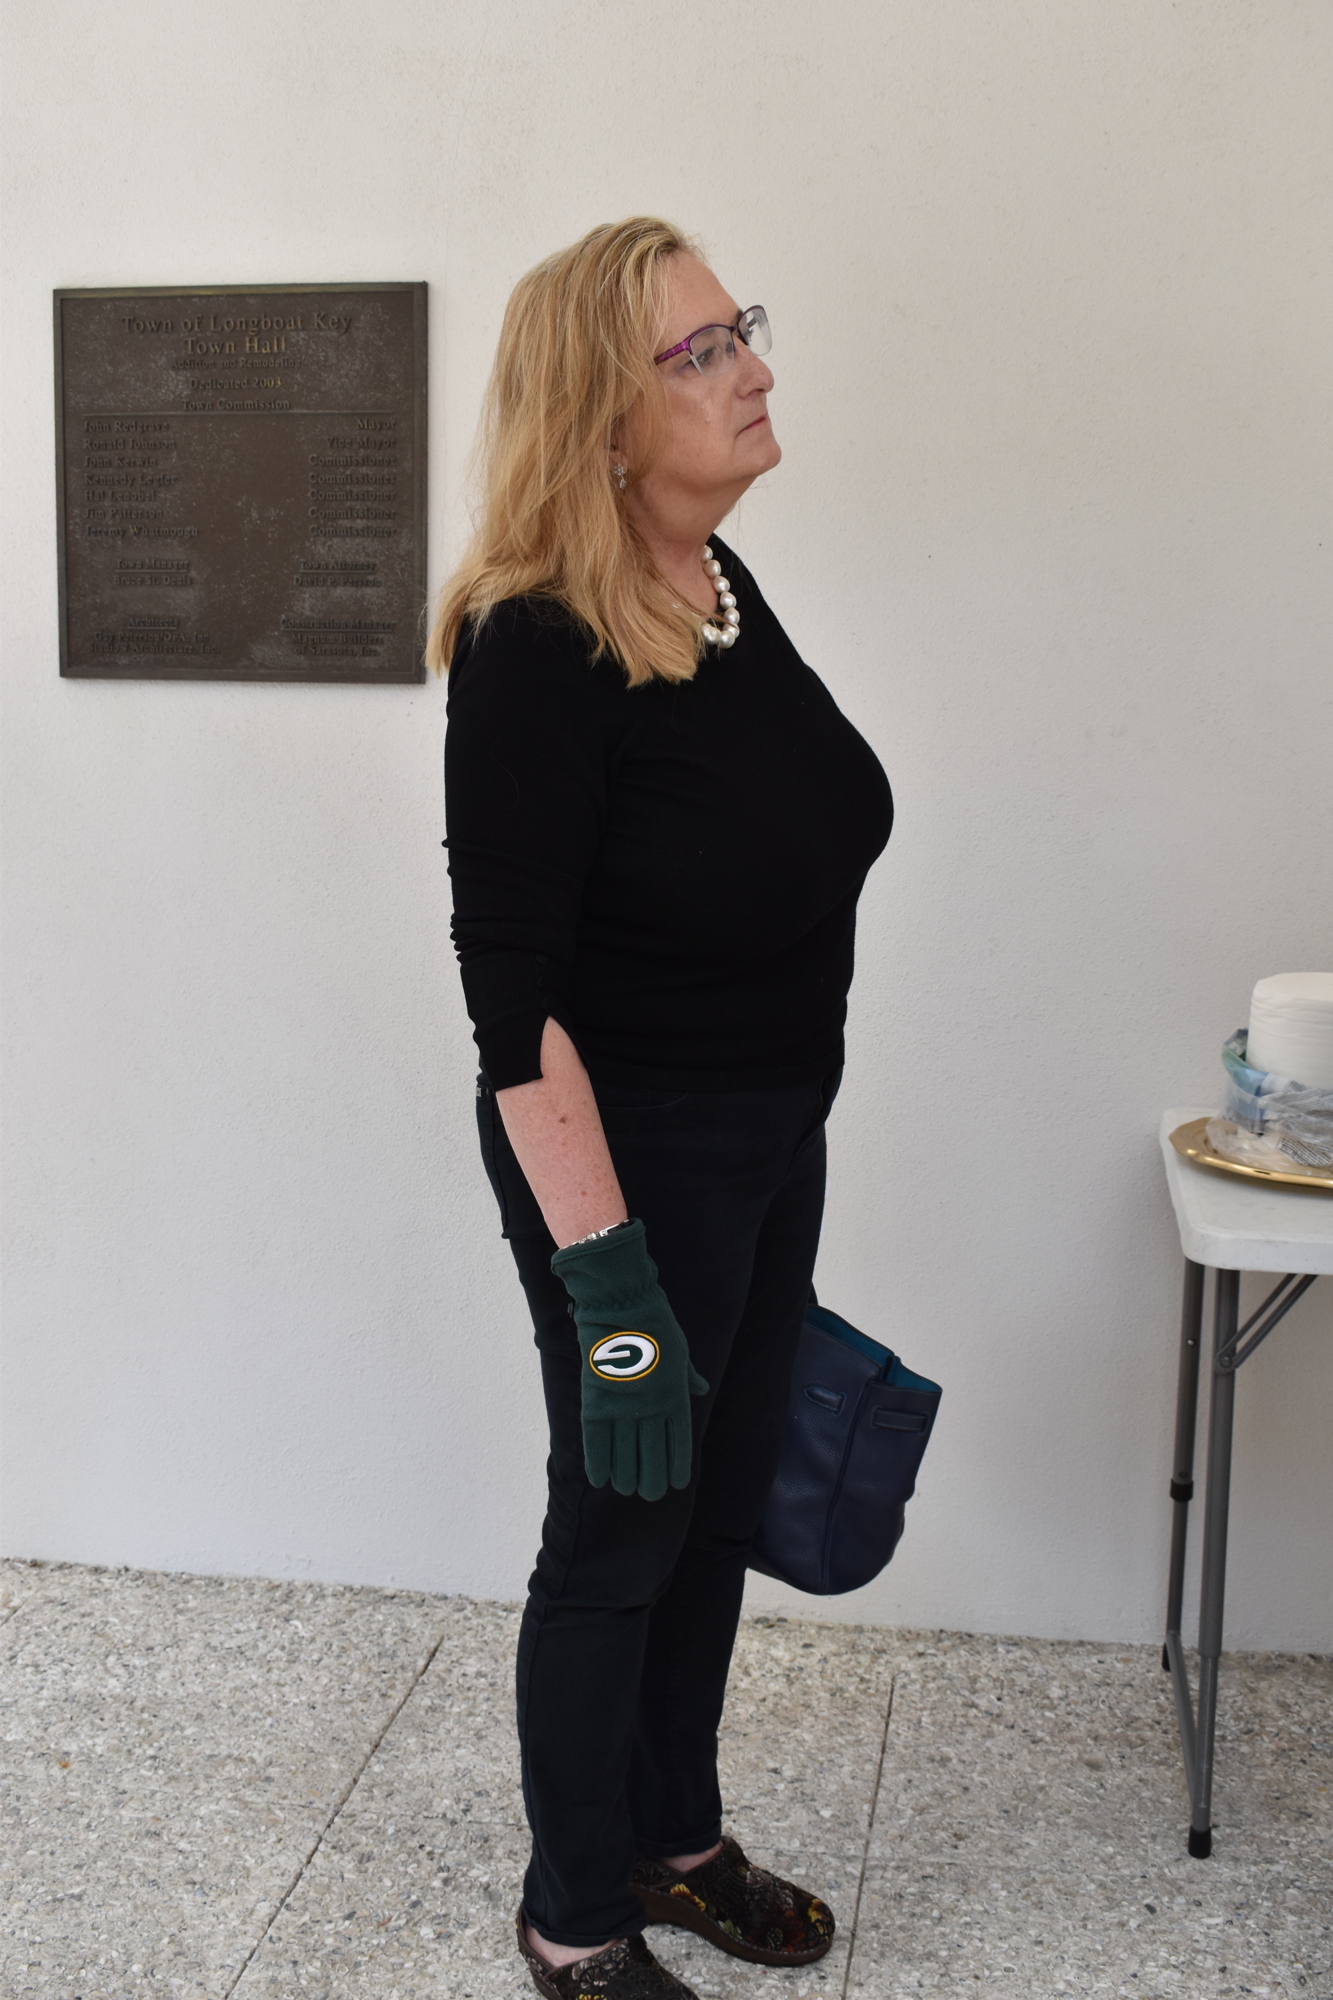 Eileen Kamerick was playing defense against the coronavirus with Green Bay Packers gloves.